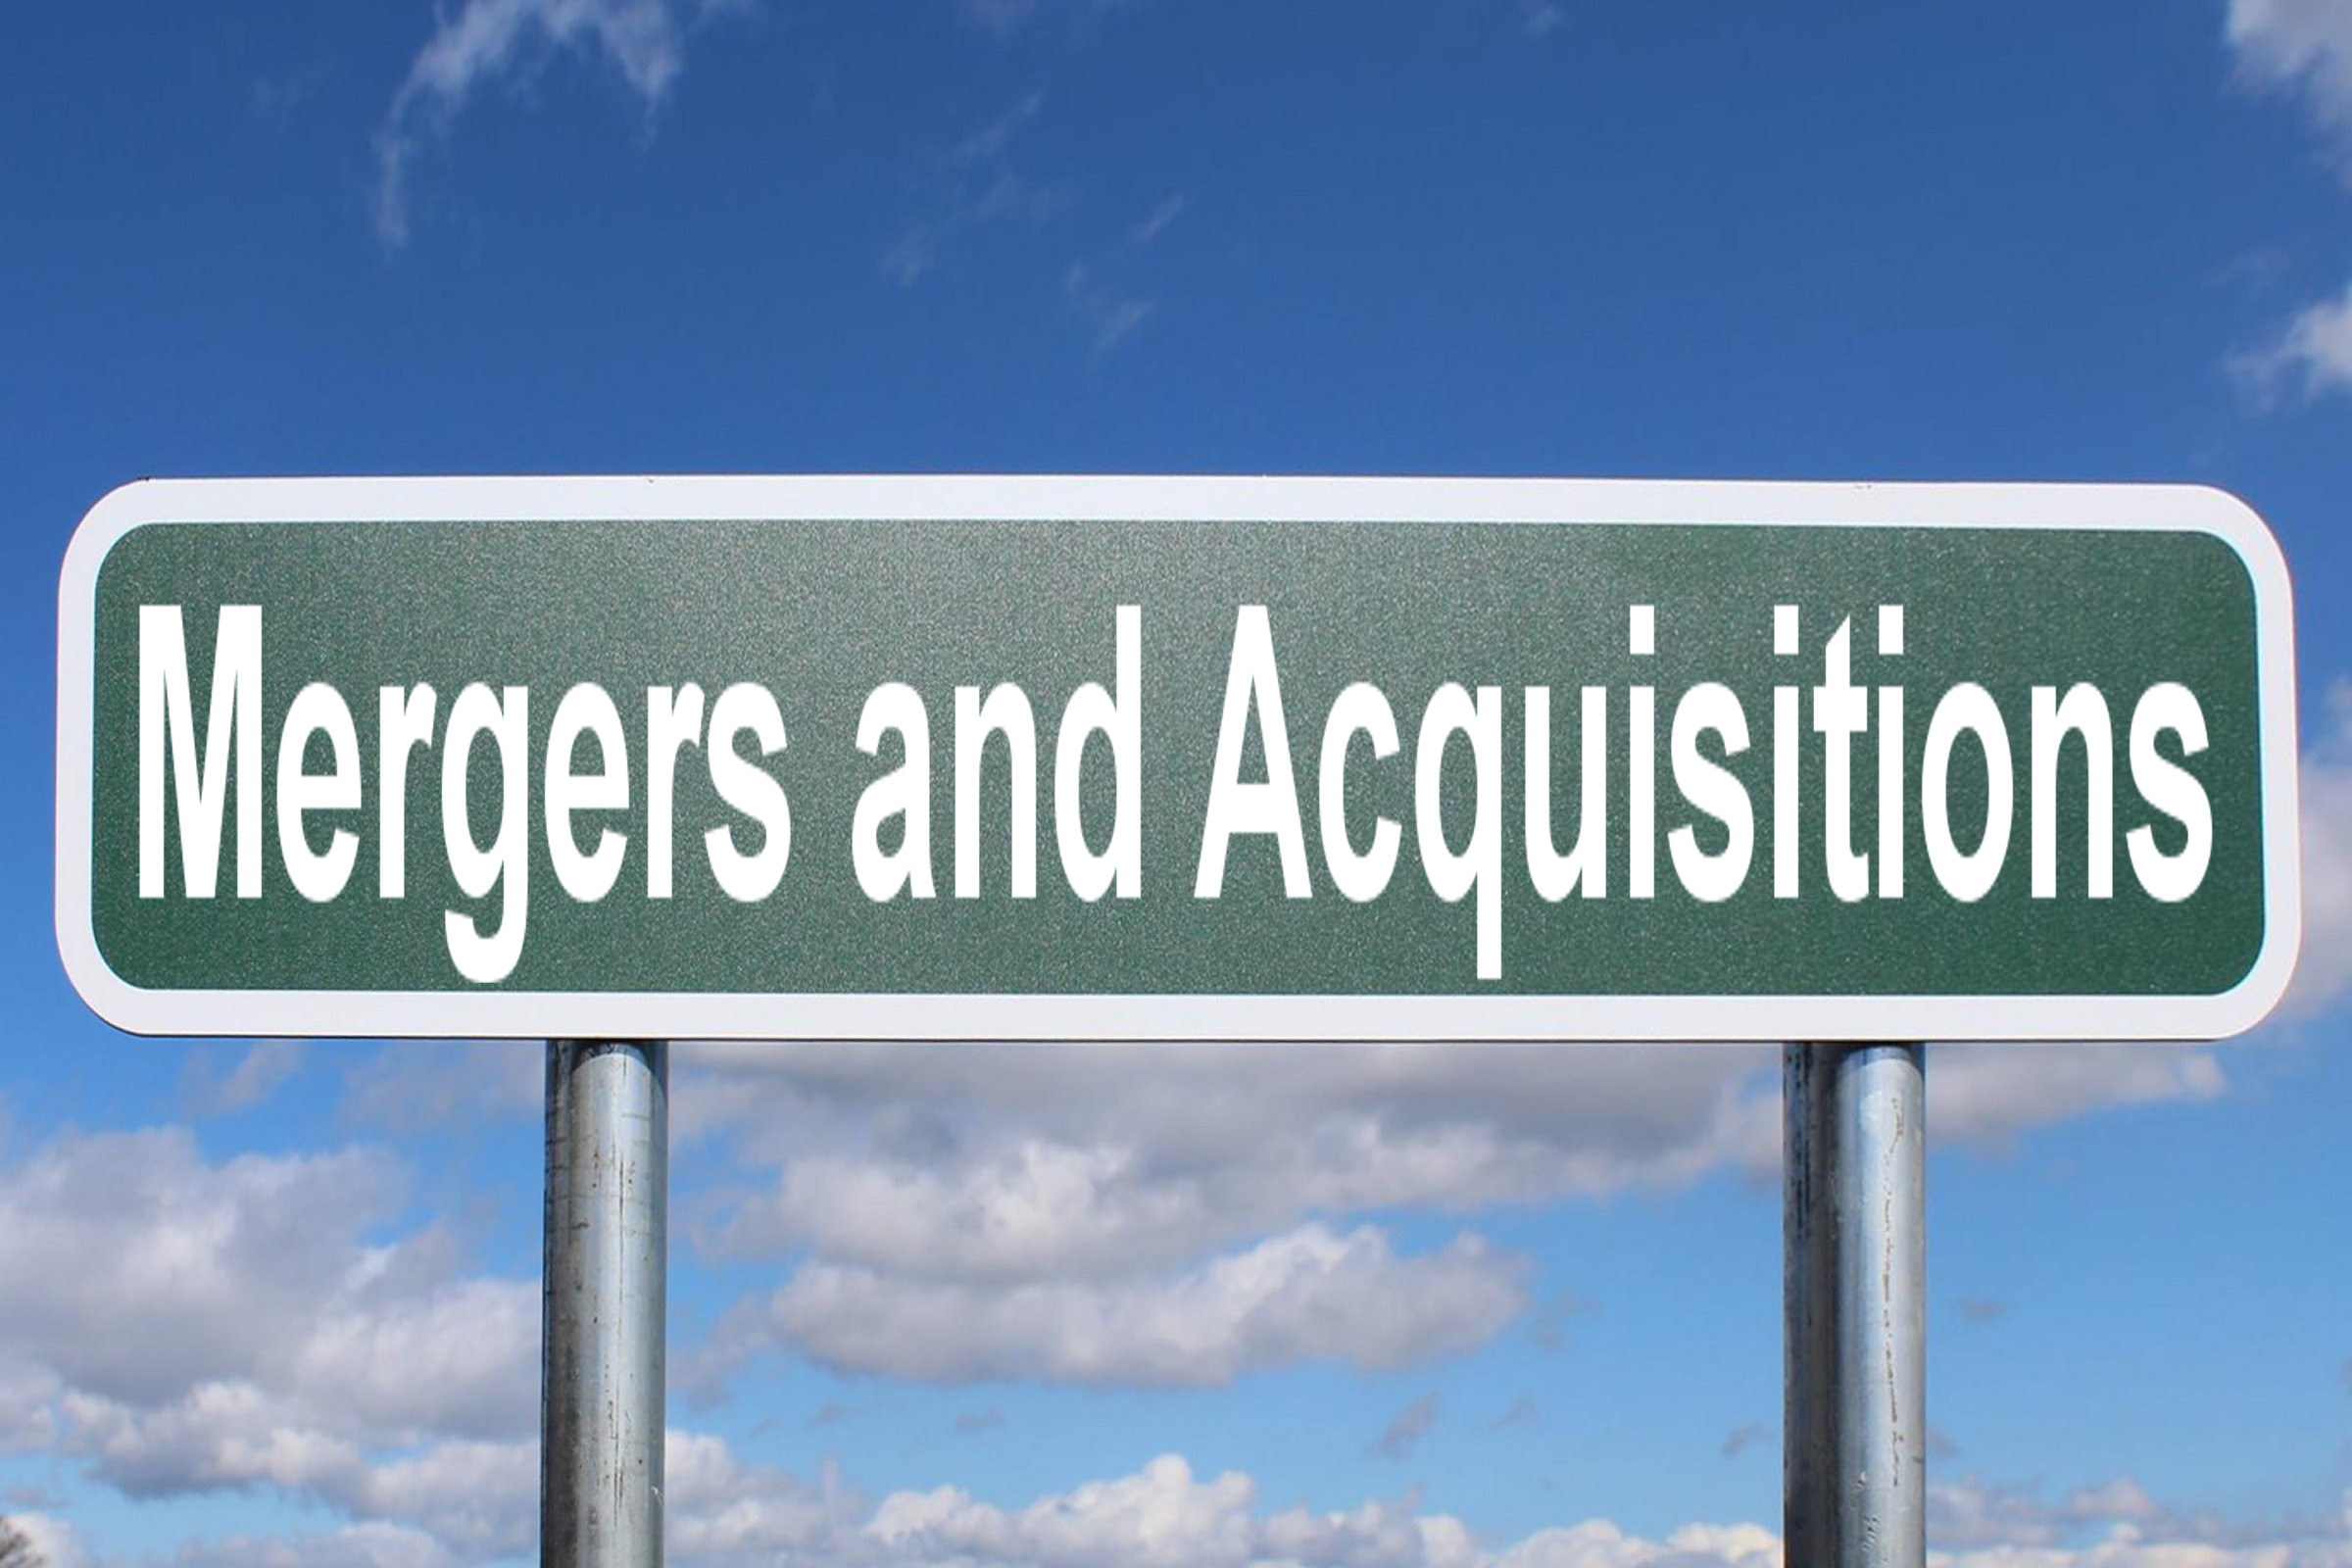 thesis on mergers and acquisitions